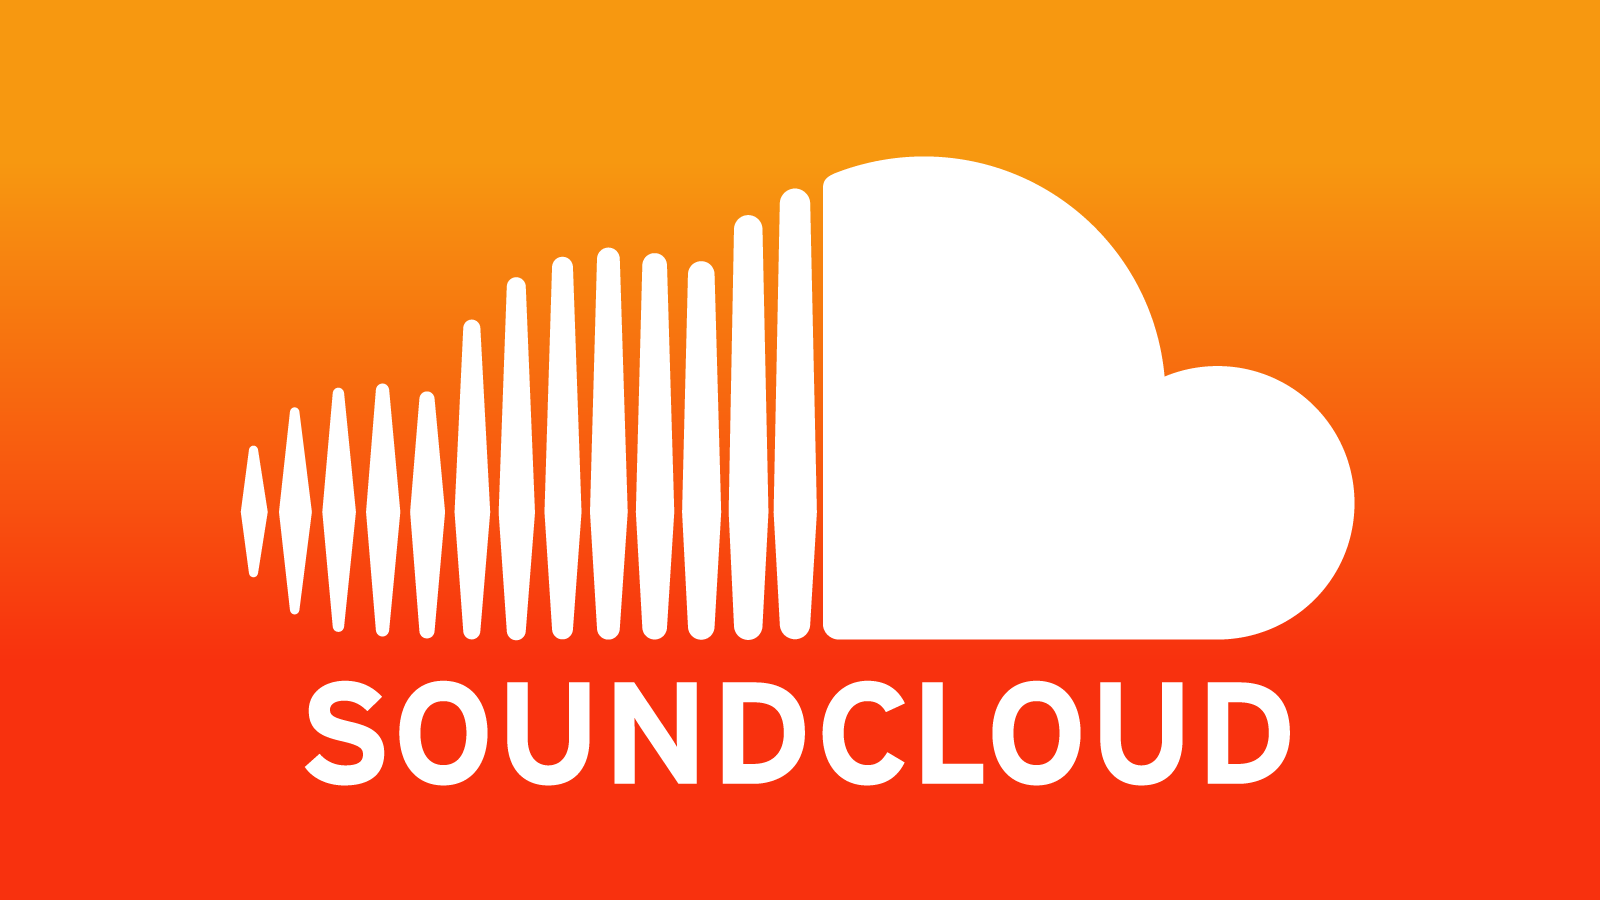 SoundCloud Logo - You Can Now Link to SoundCloud Tracks in Your Instagram Stories